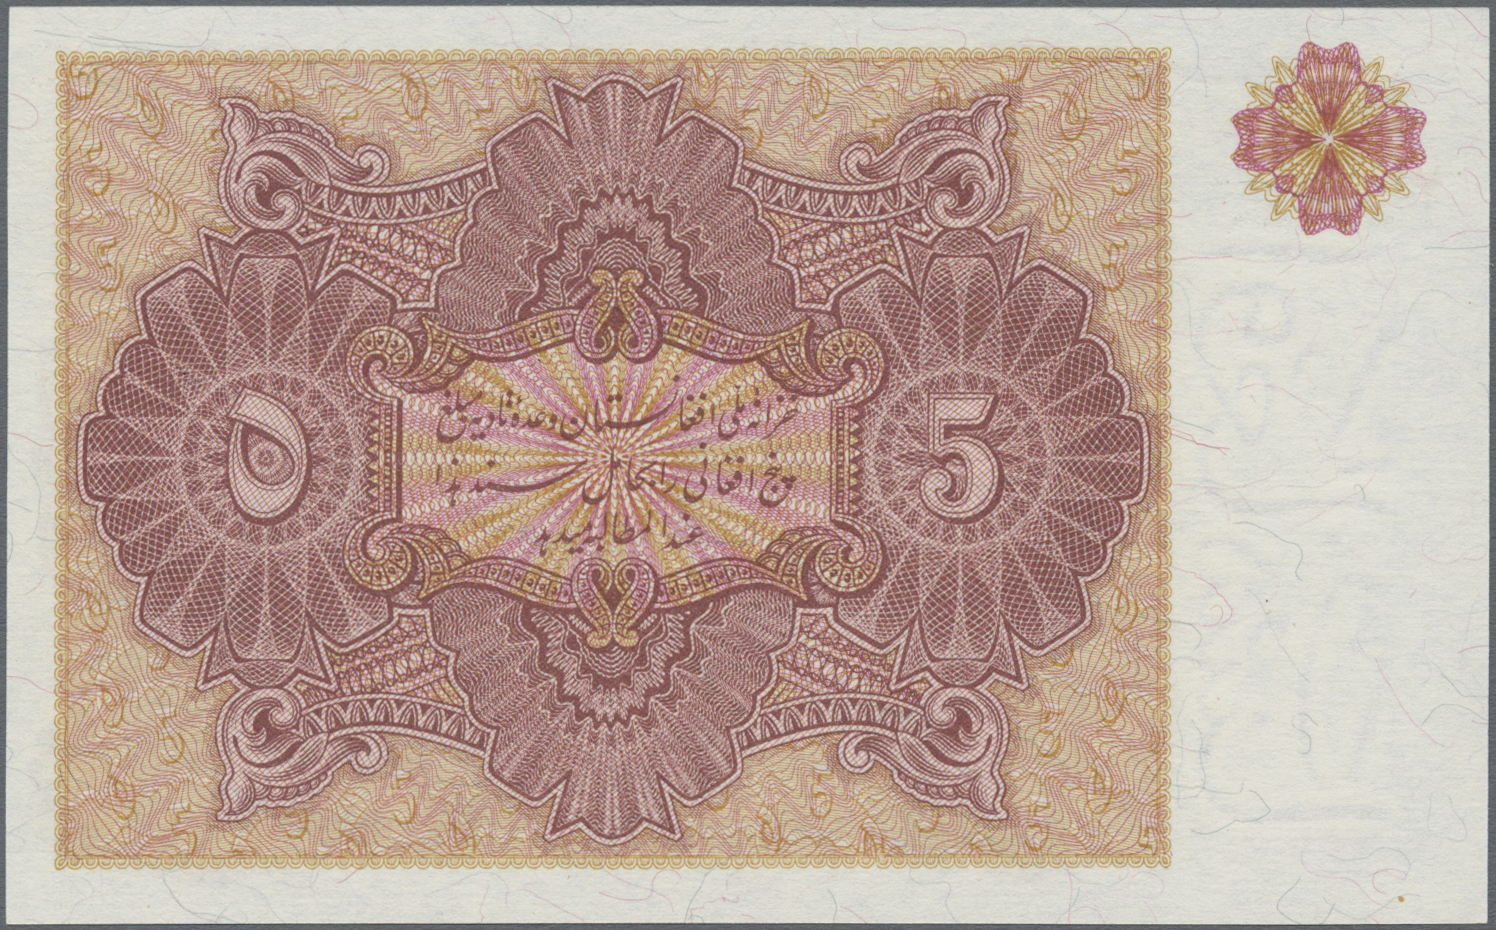 Lot 00002 - Afghanistan | Banknoten  -  Auktionshaus Christoph Gärtner GmbH & Co. KG 55th AUCTION - Day 1